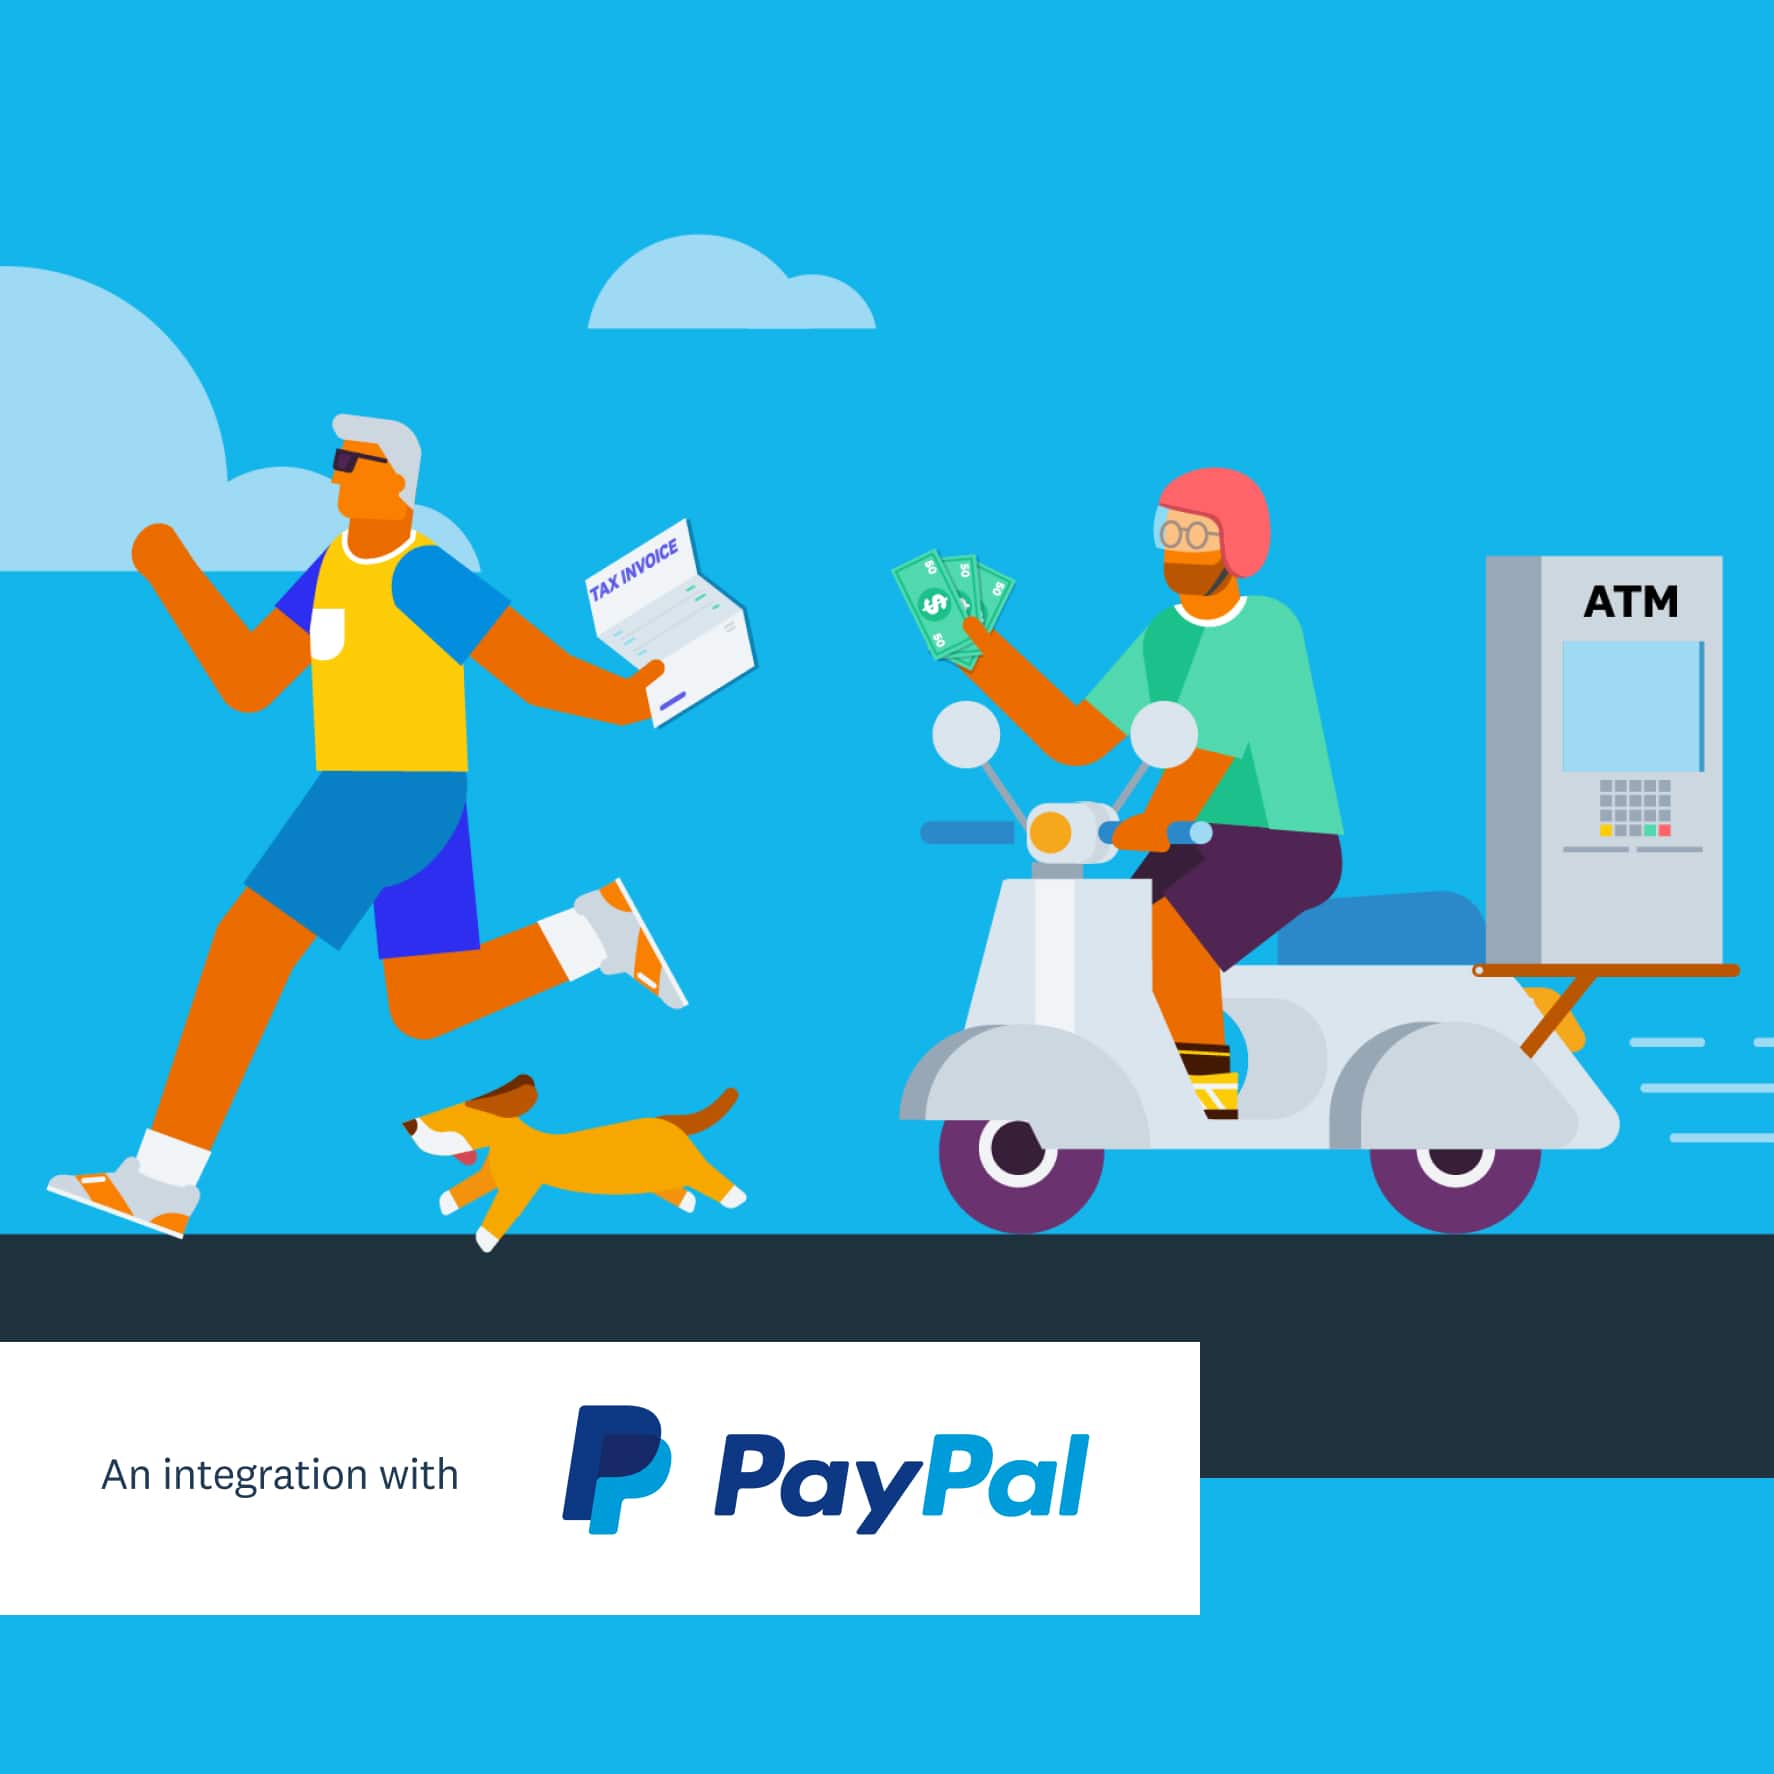 Xero in partnership with Paypal